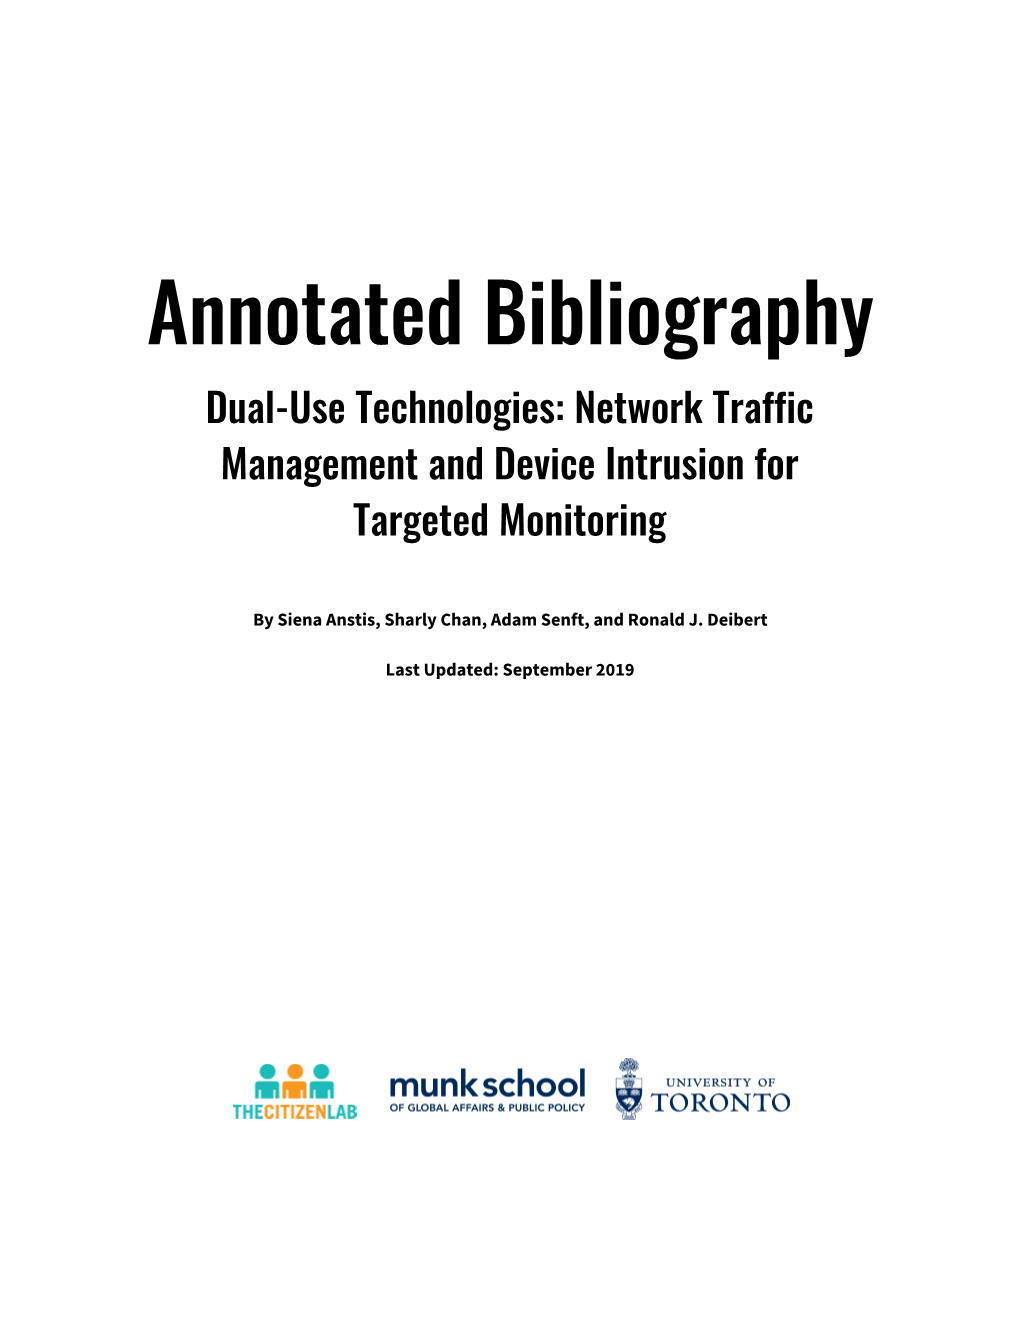 Annotated Bibliography: Dual-Use Technologies